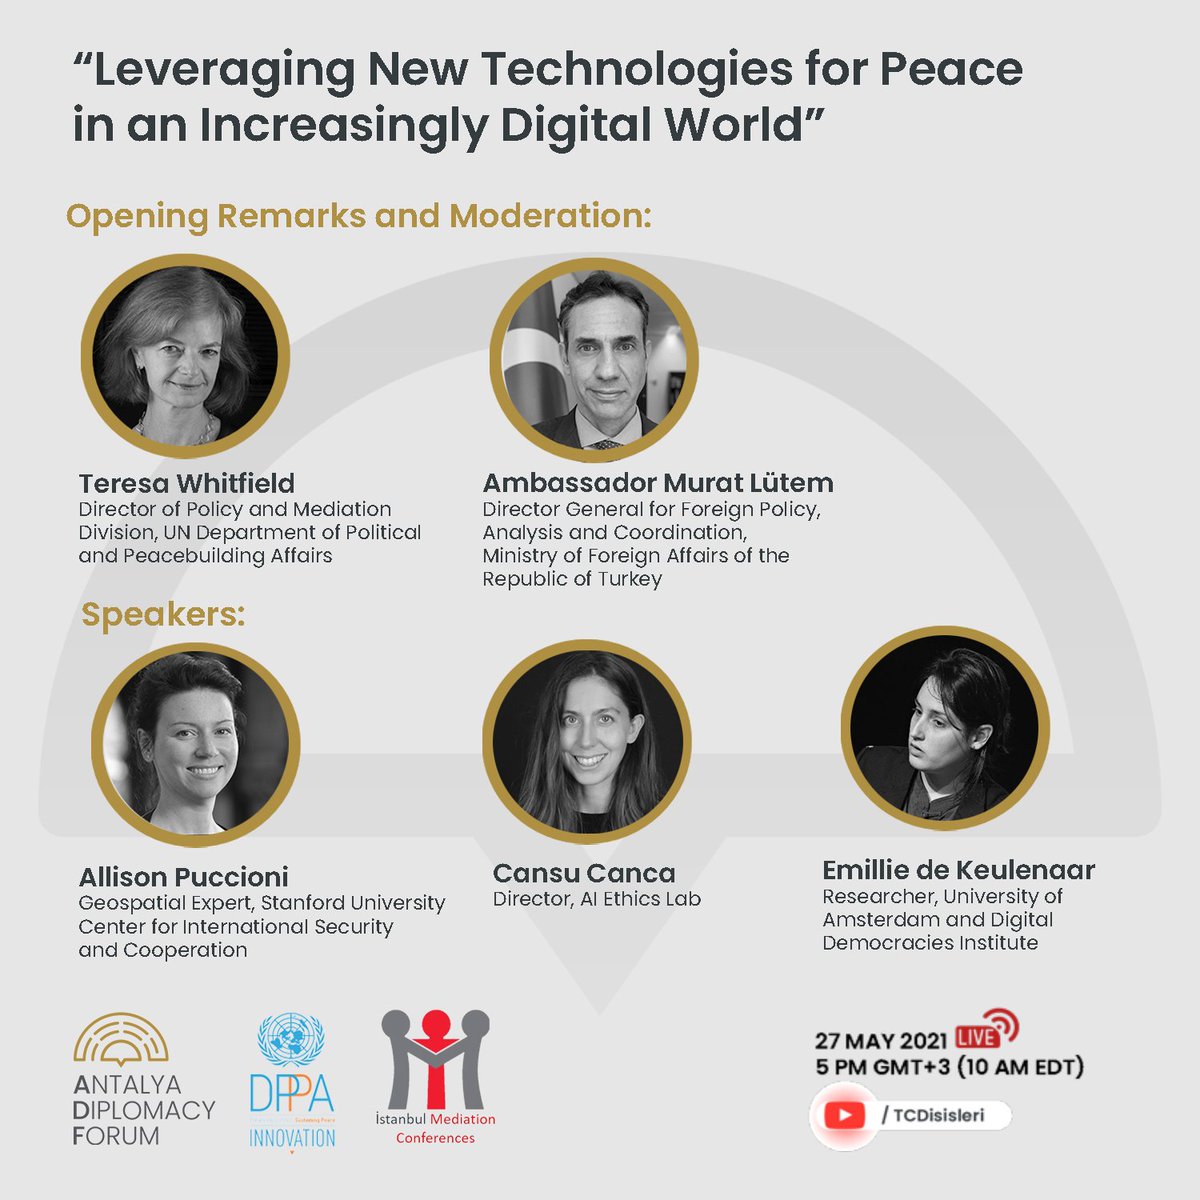 🌐 Does technology enable or hinder peace mediation?
 
Tune in to our #webinar
 📡 @AntalyaDF & youtube.com/TCDisisleri
 
#Mediation4Peace #Tech4Peace
 
 📆May 27
 🕘5 PM GMT+3 (10 AM EDT)
 
with @WhitfieldTeresa @puccioni1 @edekeulenaar @ccansu
@MFATurkey @UNDPPA